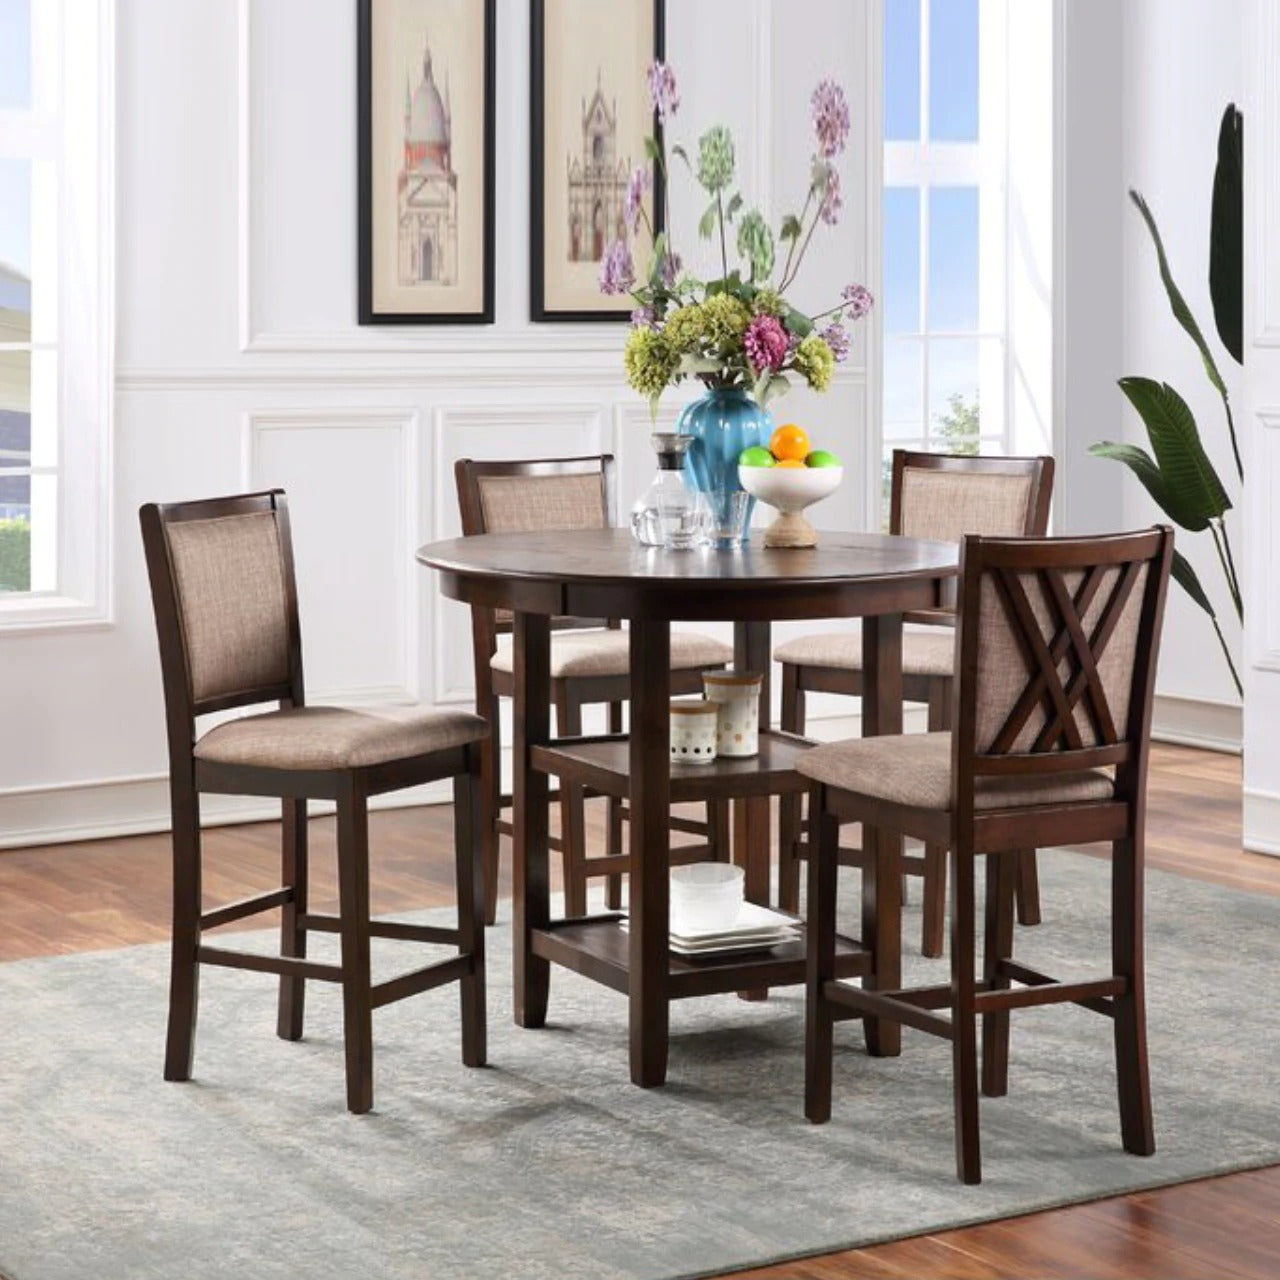 4 Seater Dining Table, Dining Table Set 4 Seater, Dining Table 4 Seater Glass Top, 4 Seater Dining Table Size